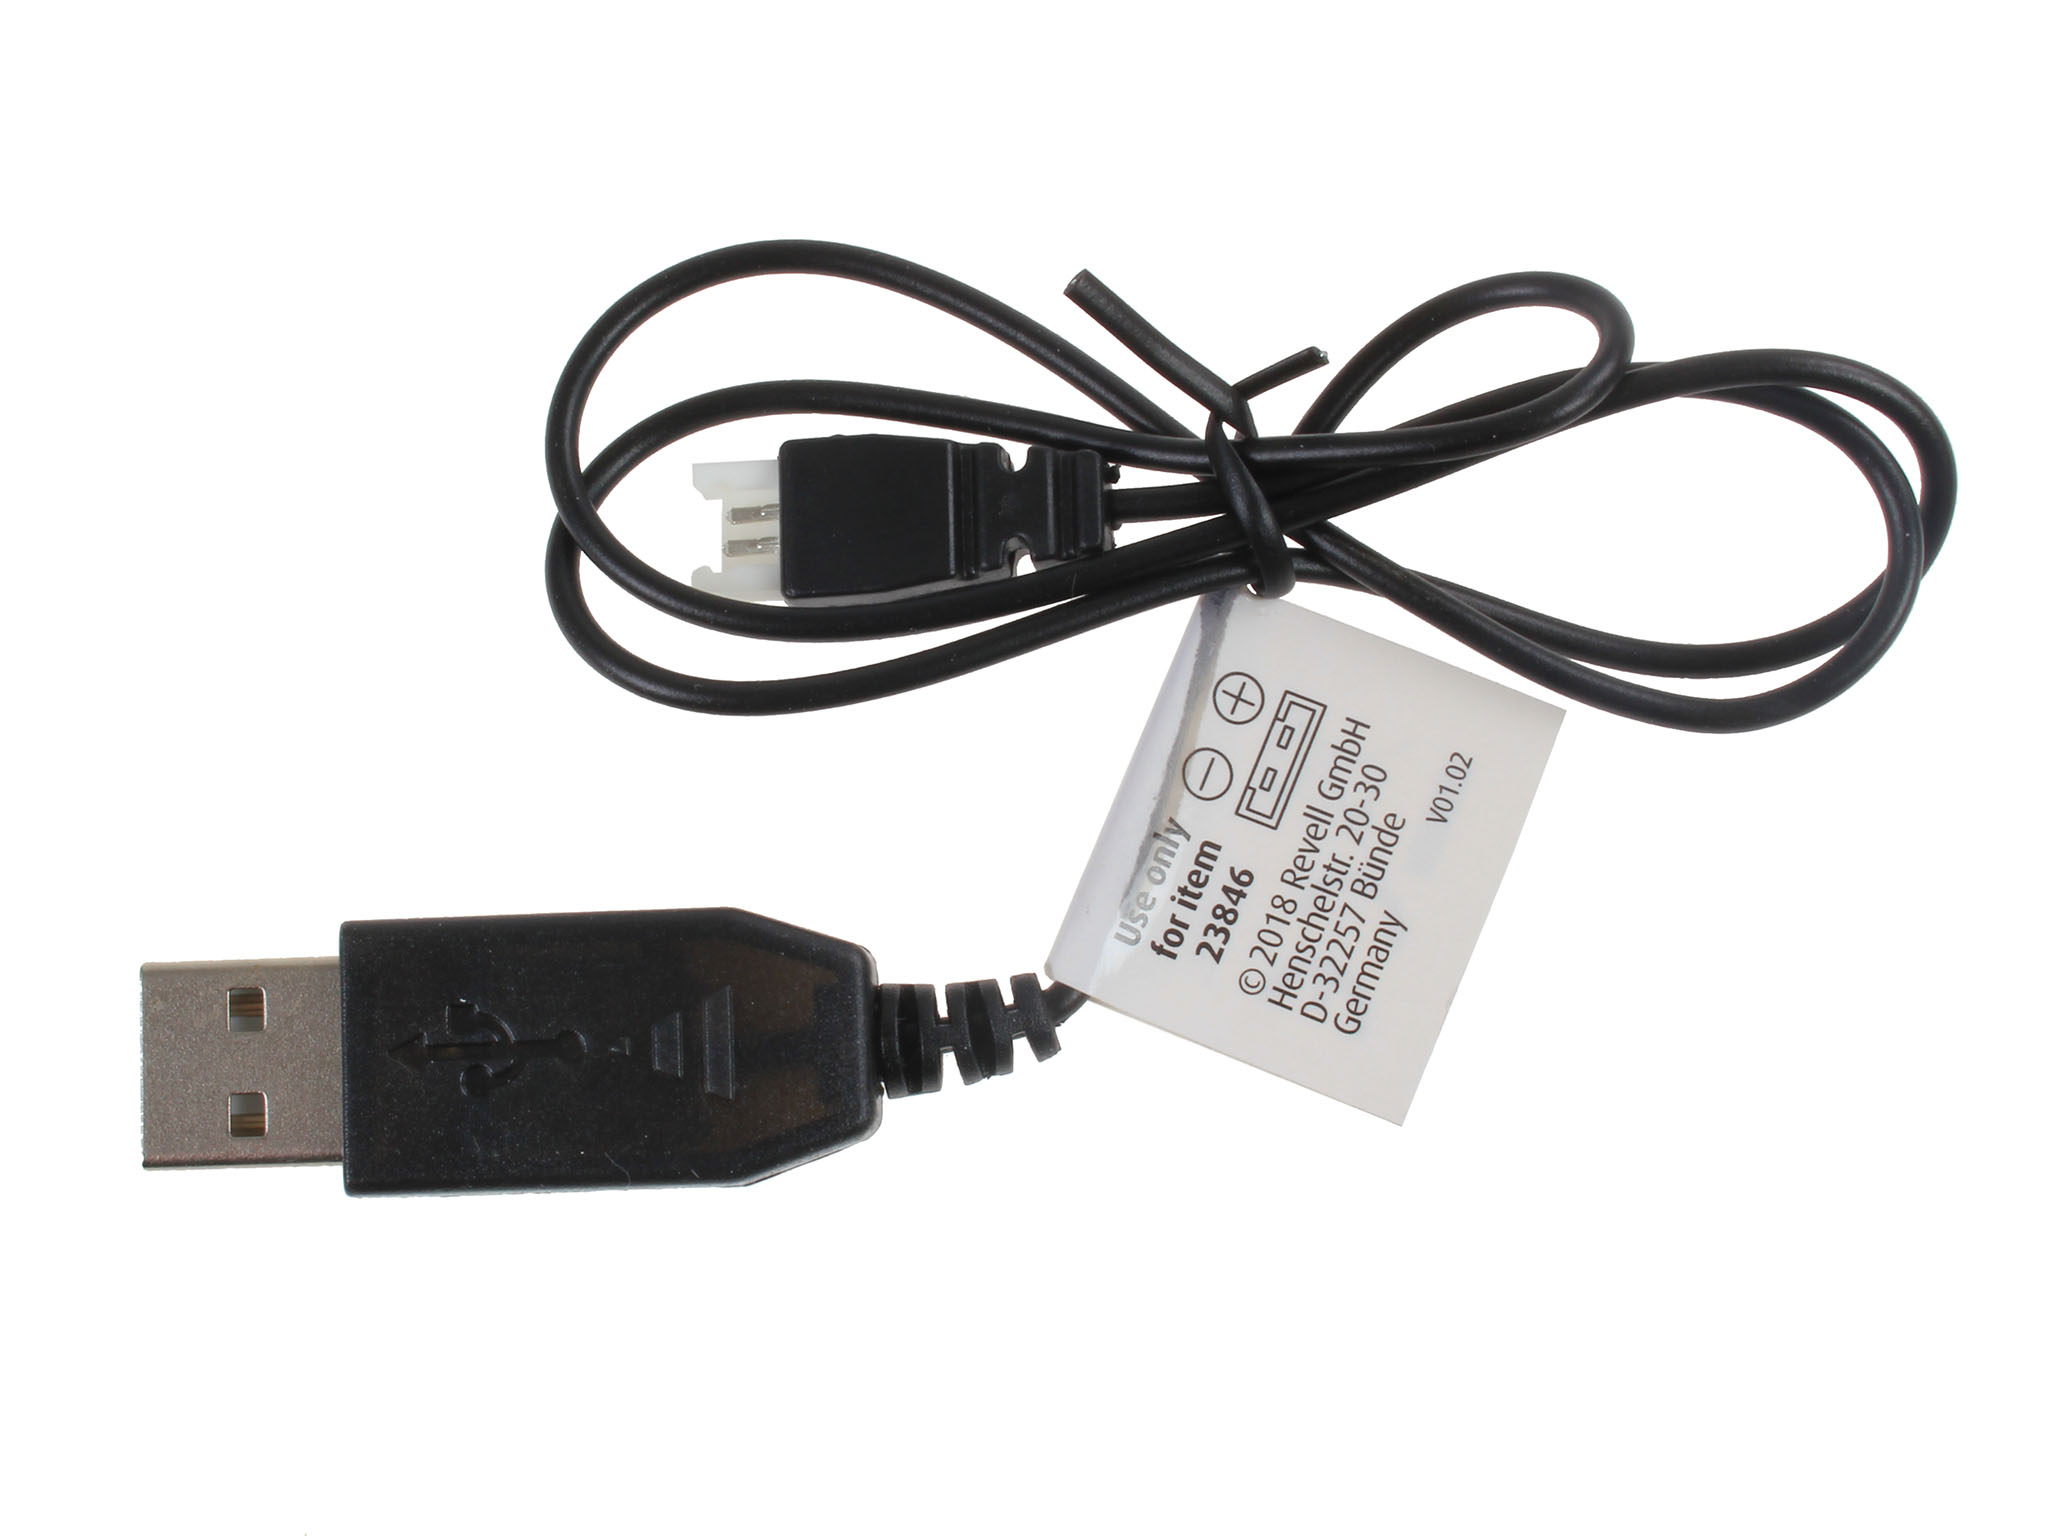 USB Charger (23846)